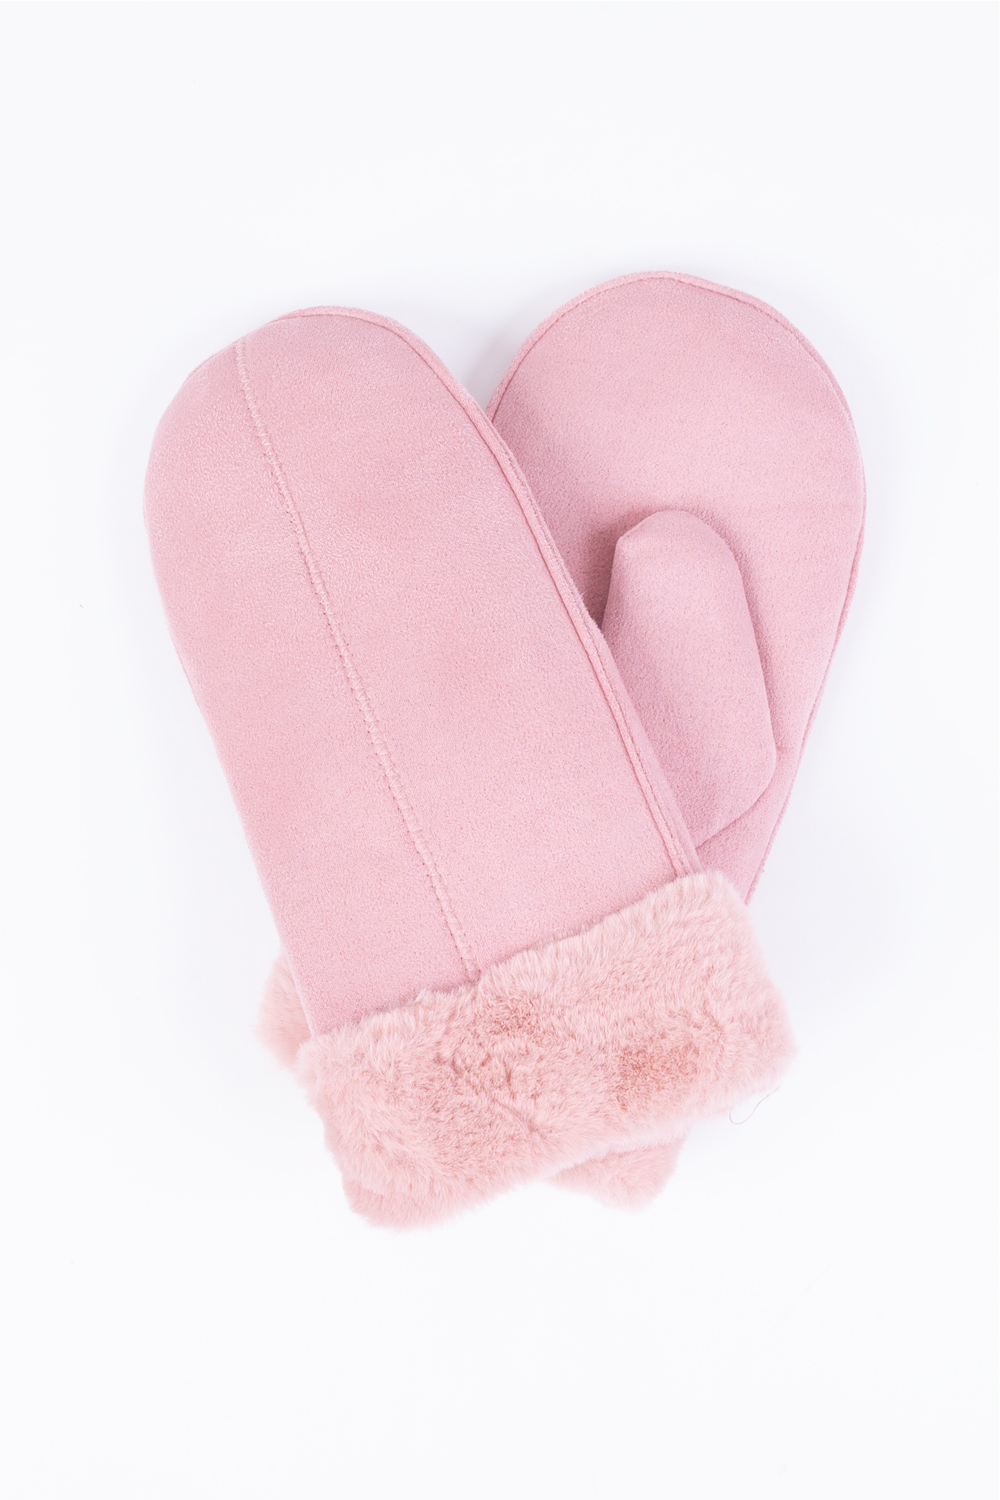 Microsuede mittens trimmed with faux fur